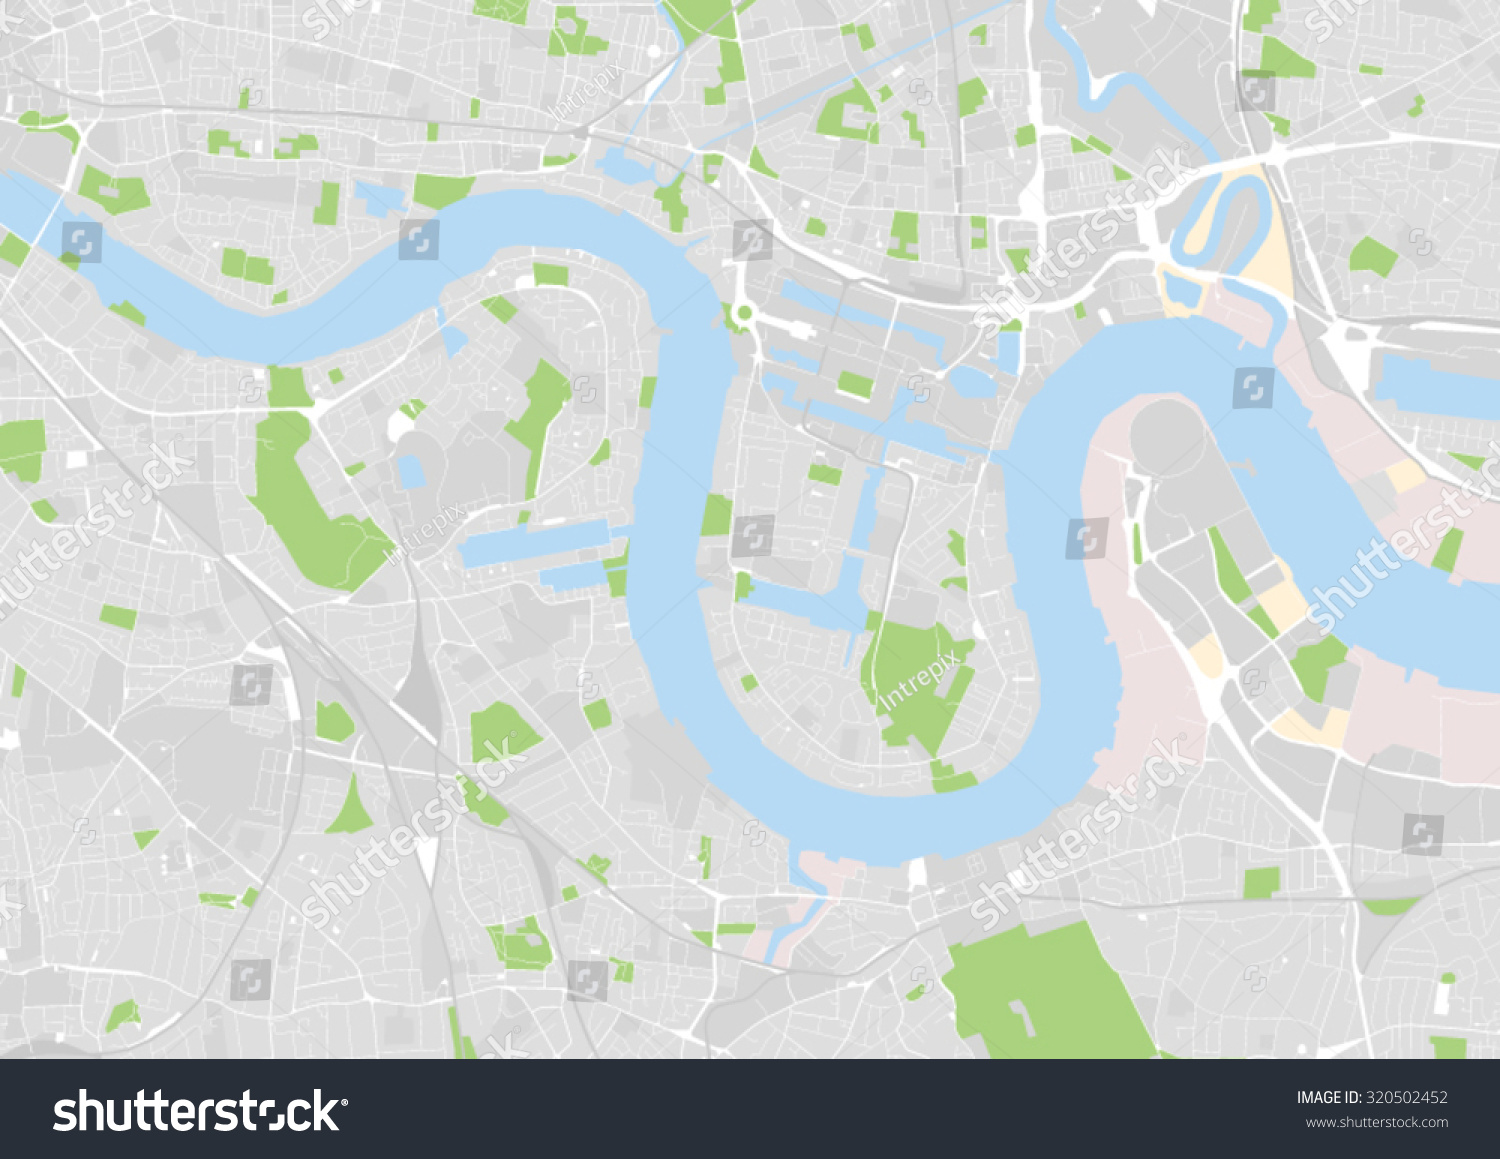 vector map of east central London, docklands, Greenwich  #320502452